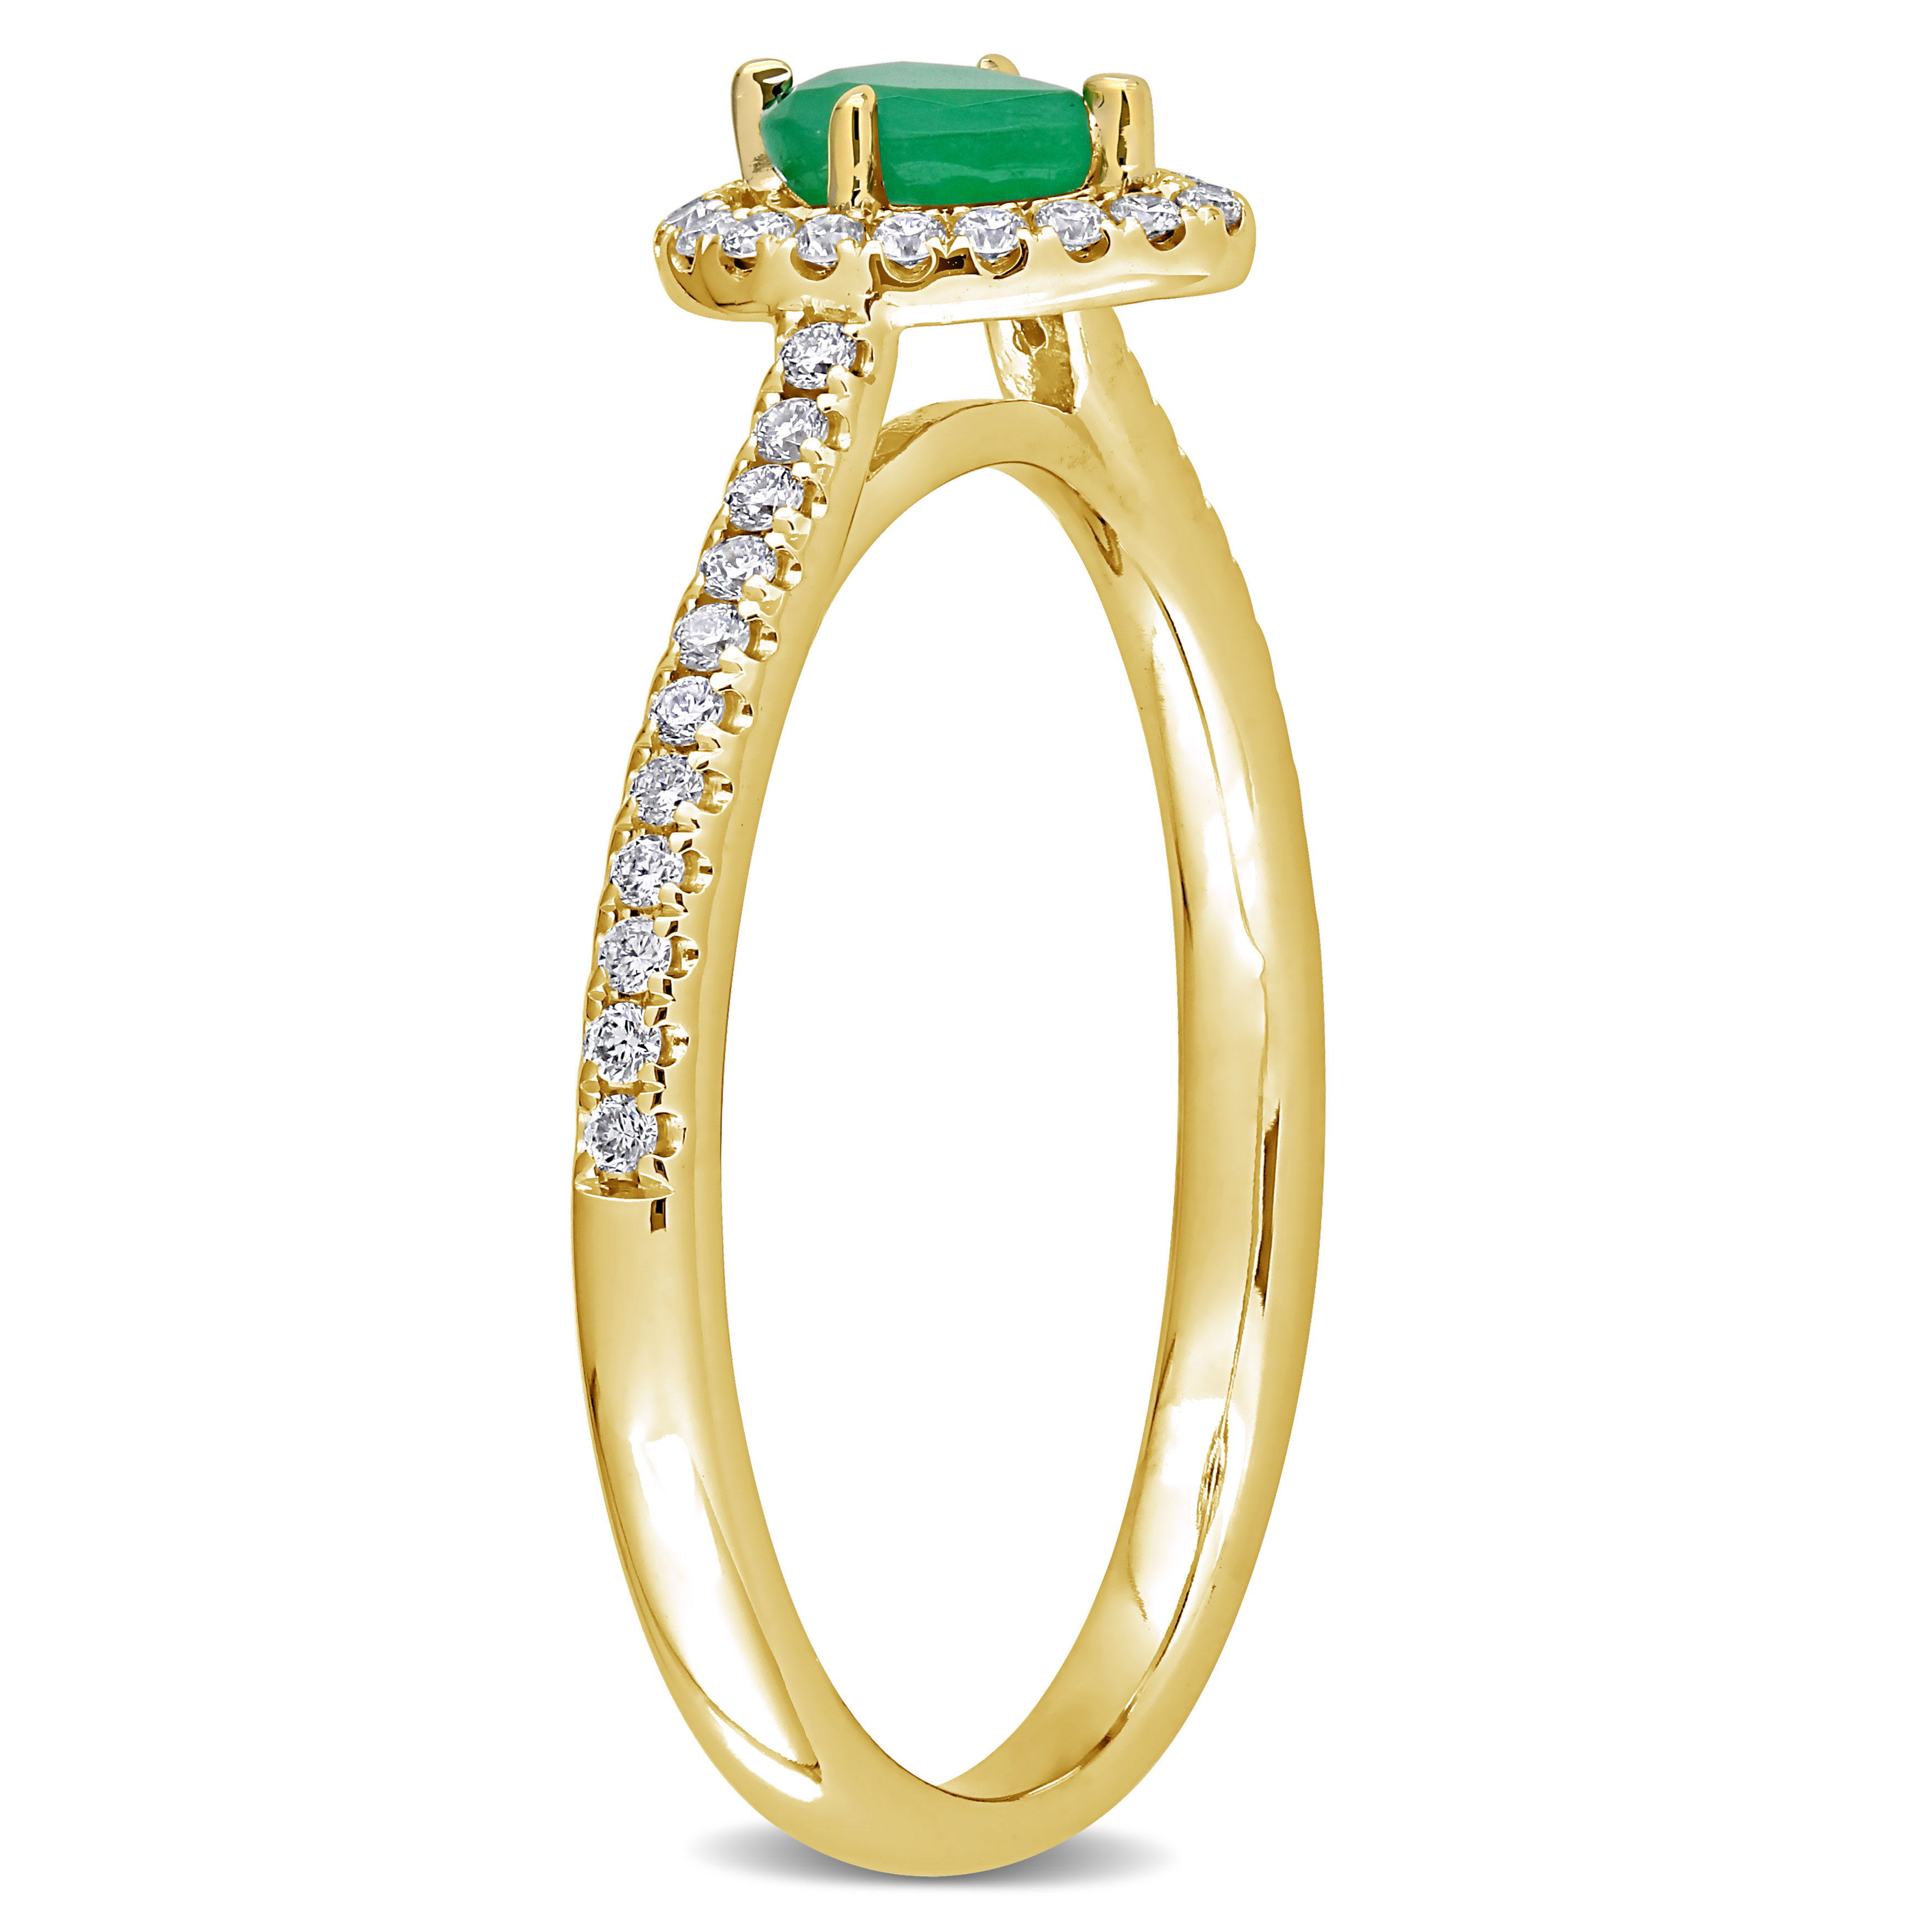 1/3 CT TGW Pear-Shape Emerald and 1/5 CT TDW Diamond Halo Ring in 14k Yellow Gold